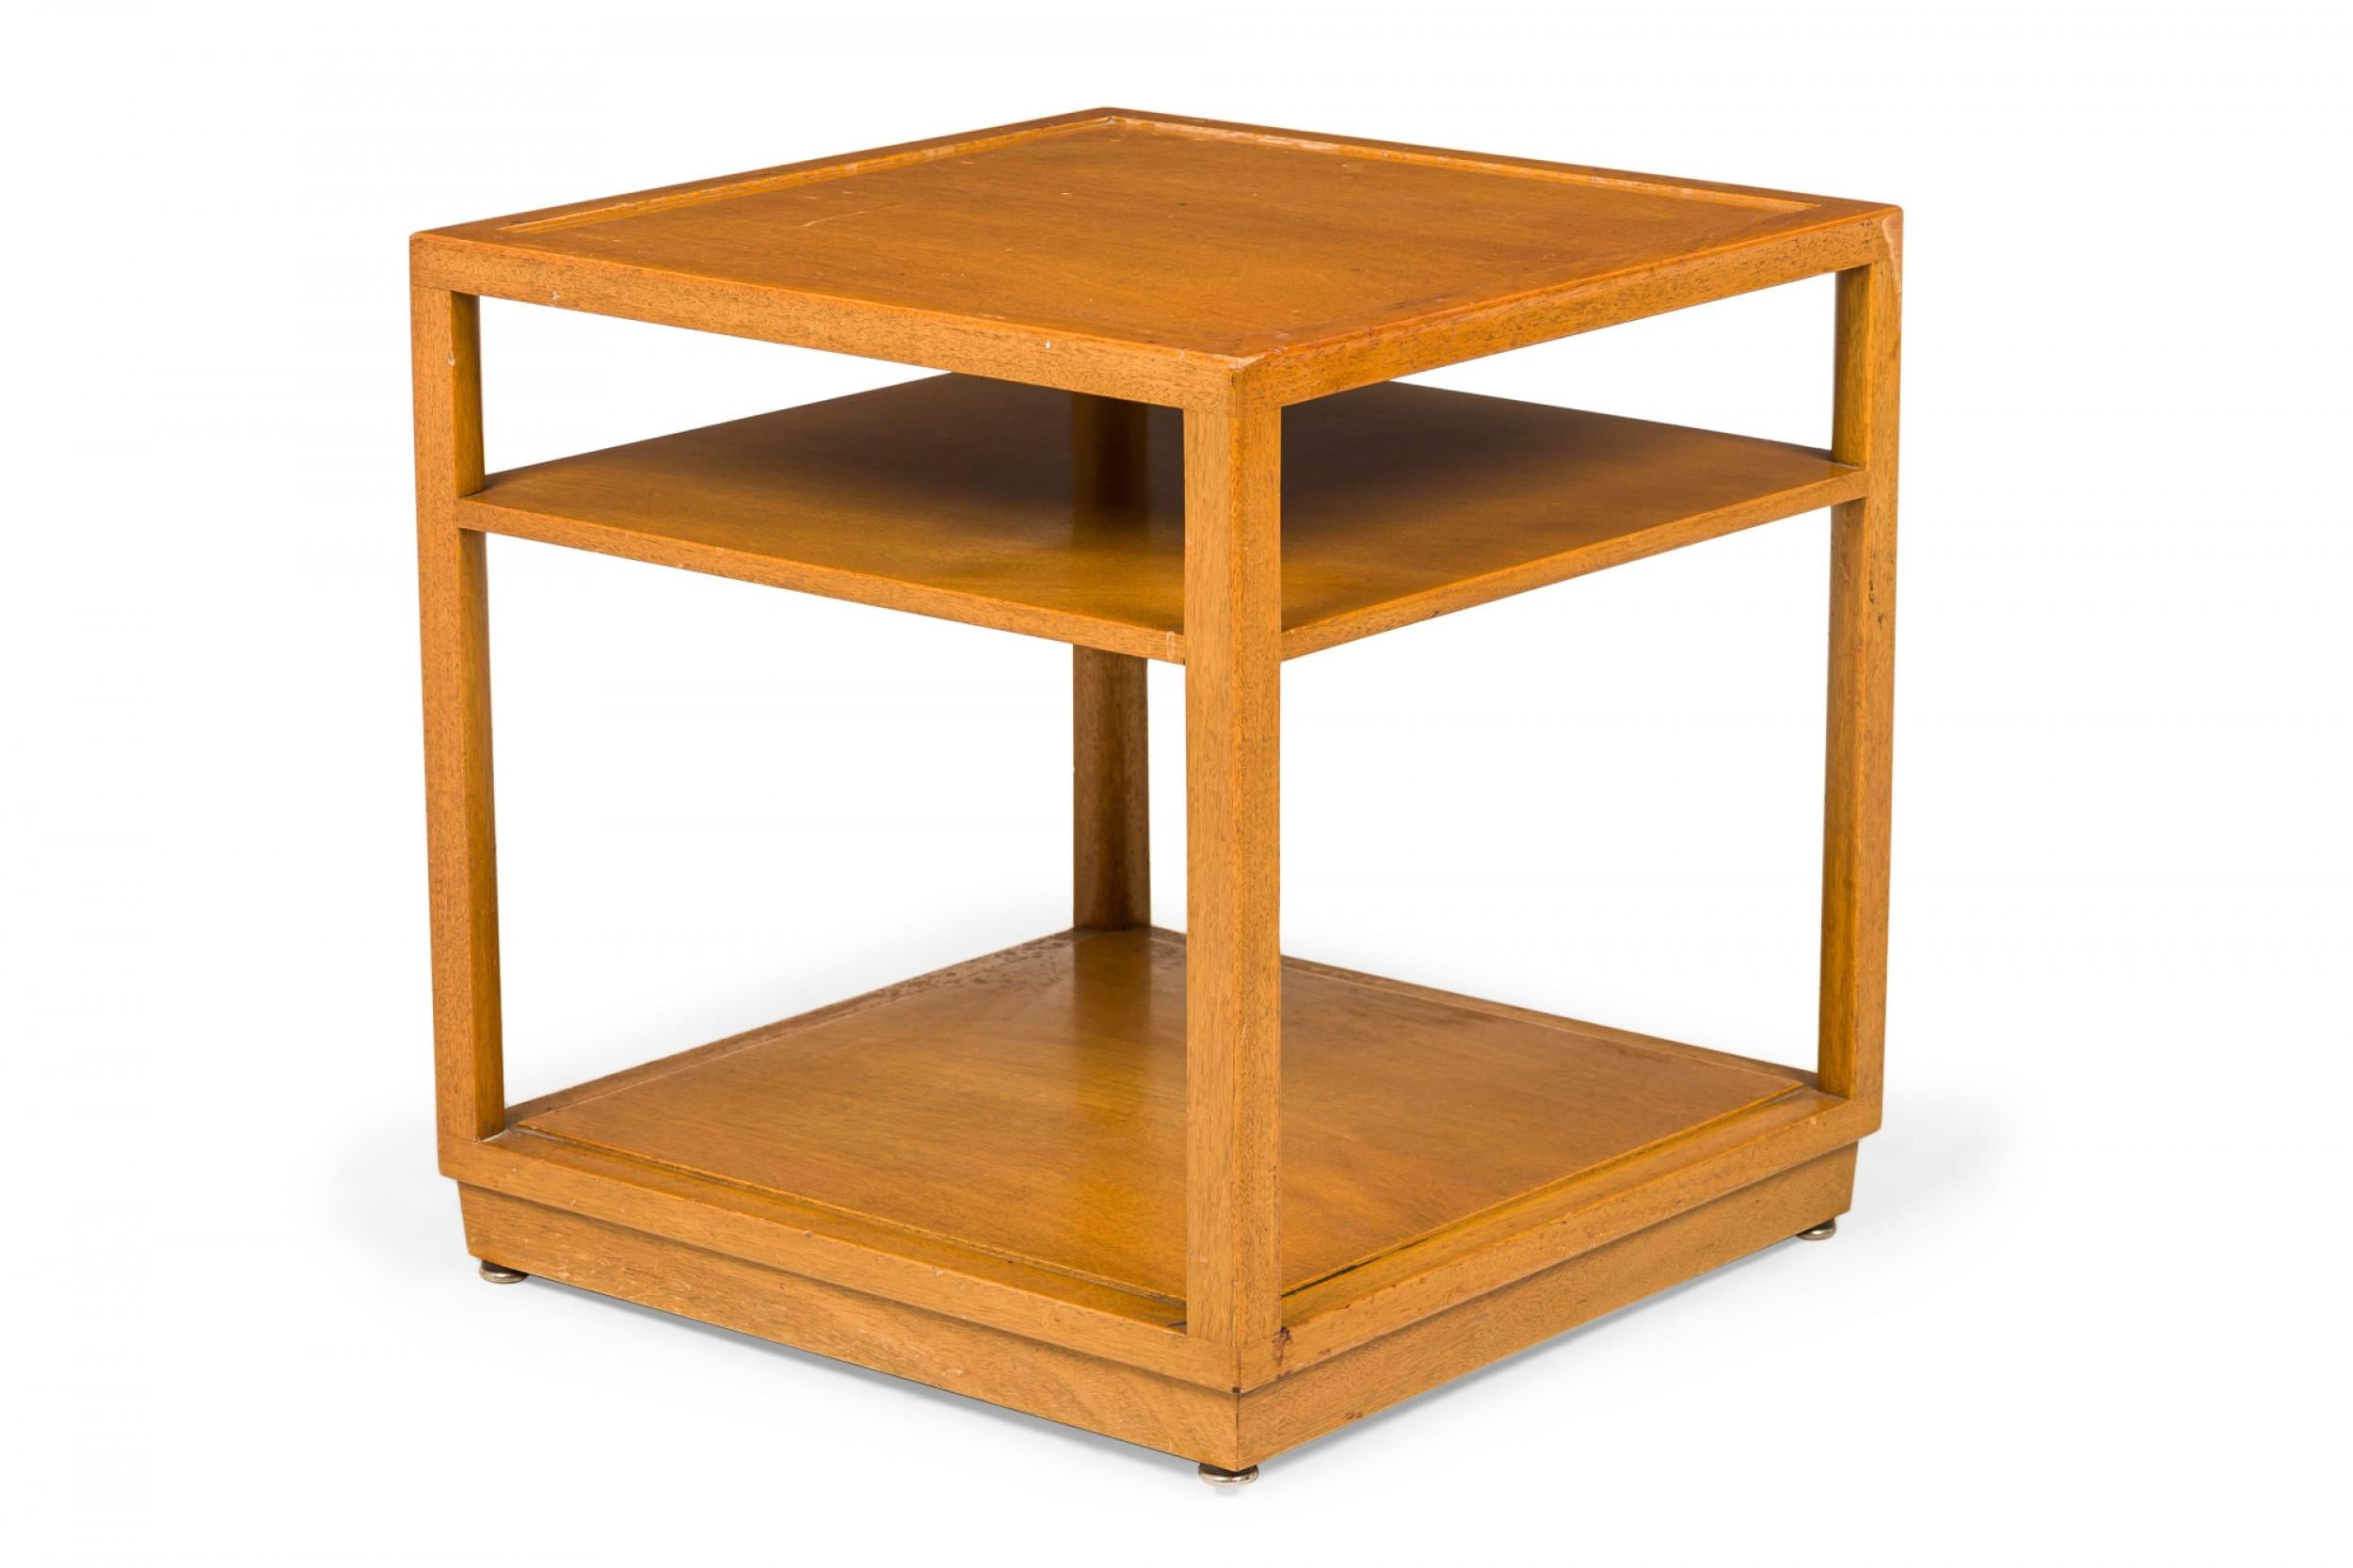 Pair of Edward Wormley for Dunbar Square Wooden Double Shelf End / Side Table In Good Condition For Sale In New York, NY